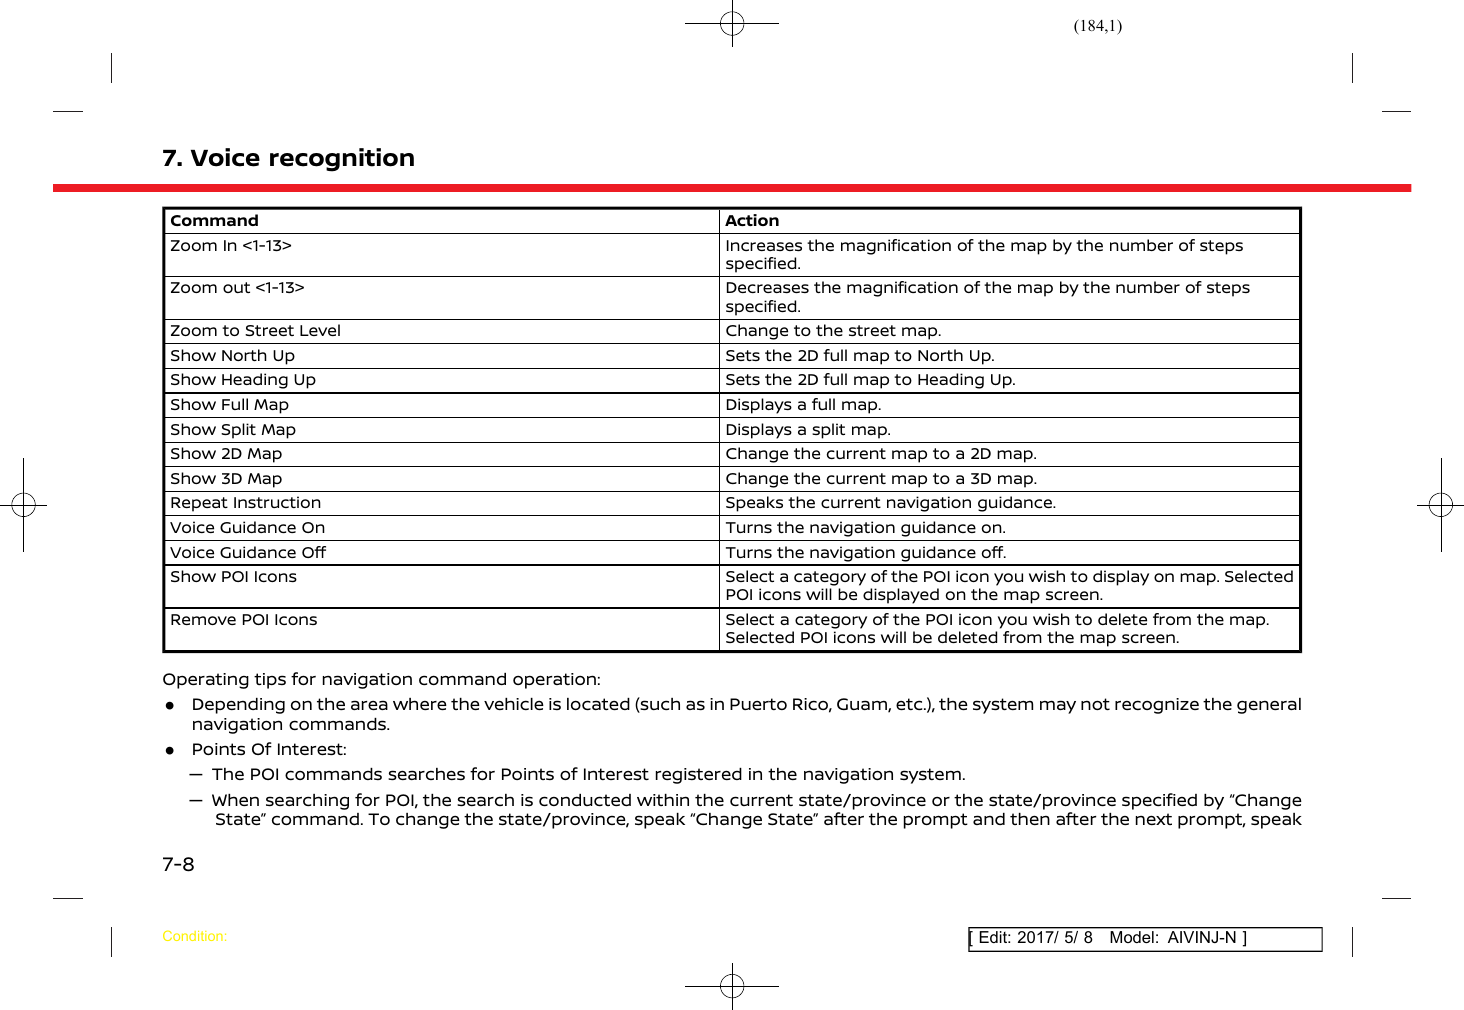 Page 184 of Robert Bosch Car Multimedia AIVICMFB0 Navigation System with Bluetooth and WLAN User Manual